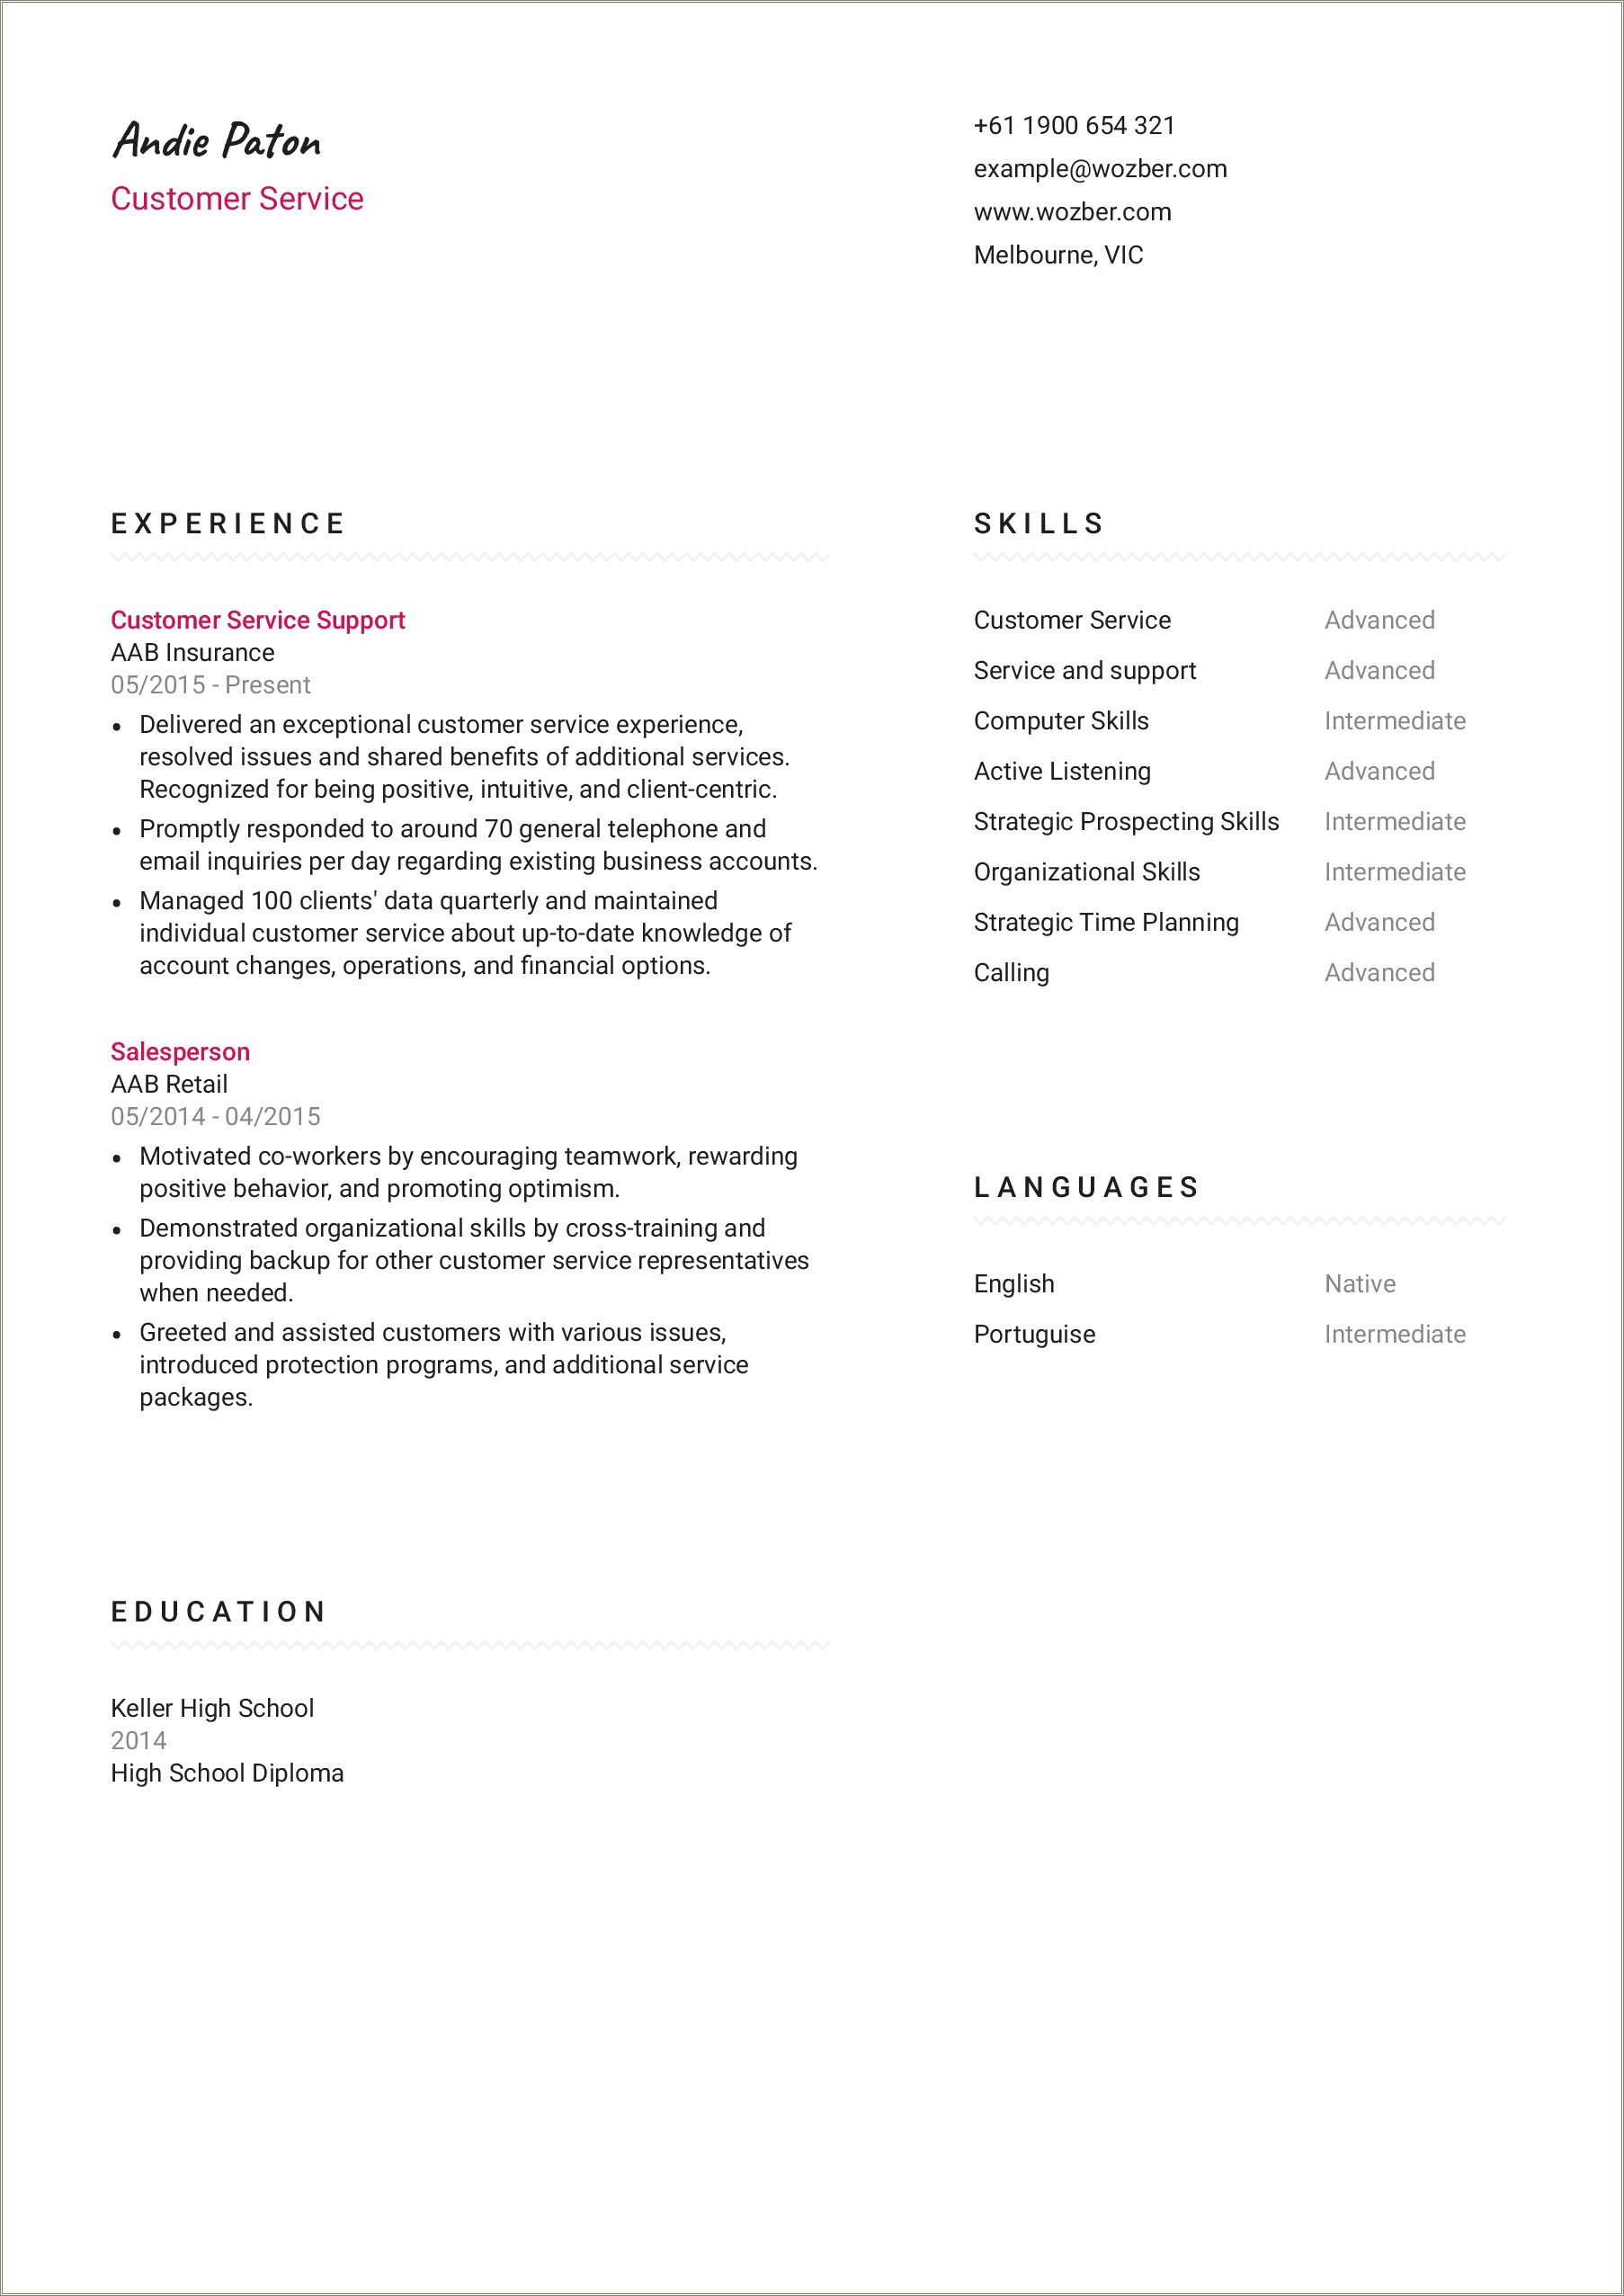 Sample Resume For Cutomer Seruvece Position